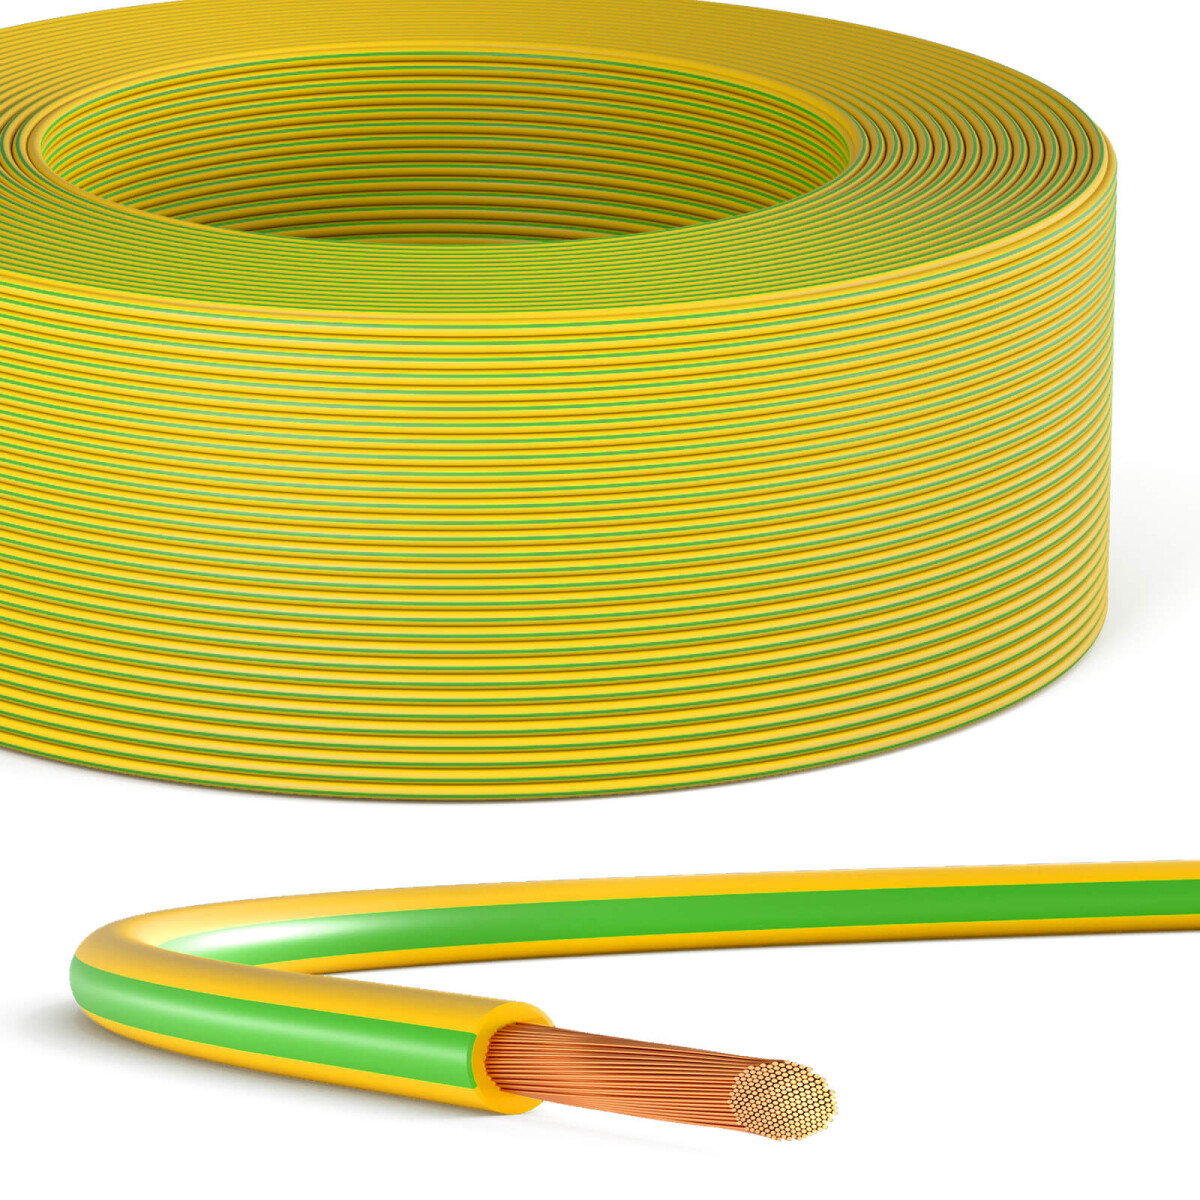 500m solar cable 6mm2 PV cable for solar systems kabeltec H1Z2Z2-K typ,  595,00 €